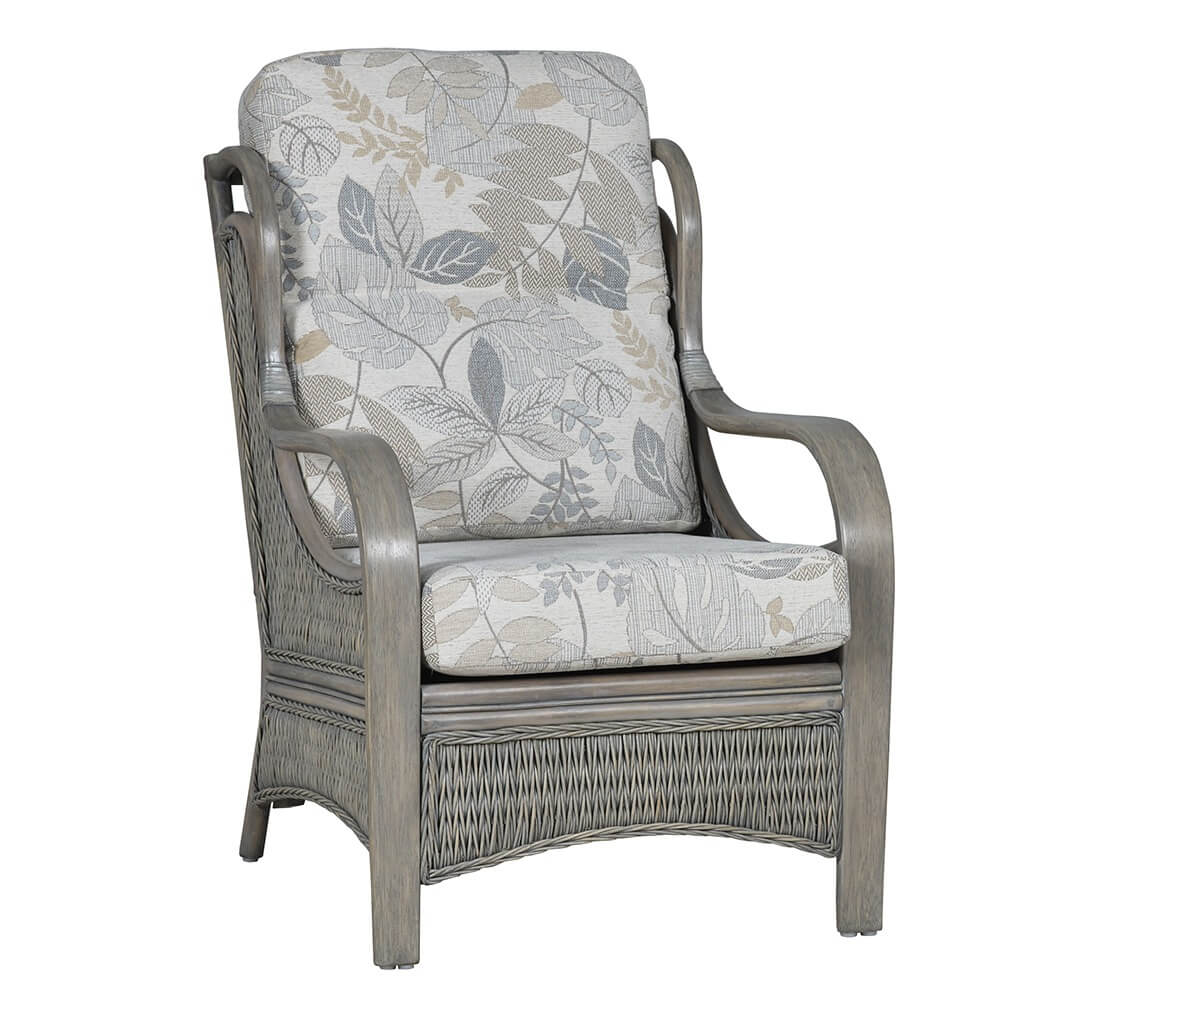 Showing image for Eden armchair